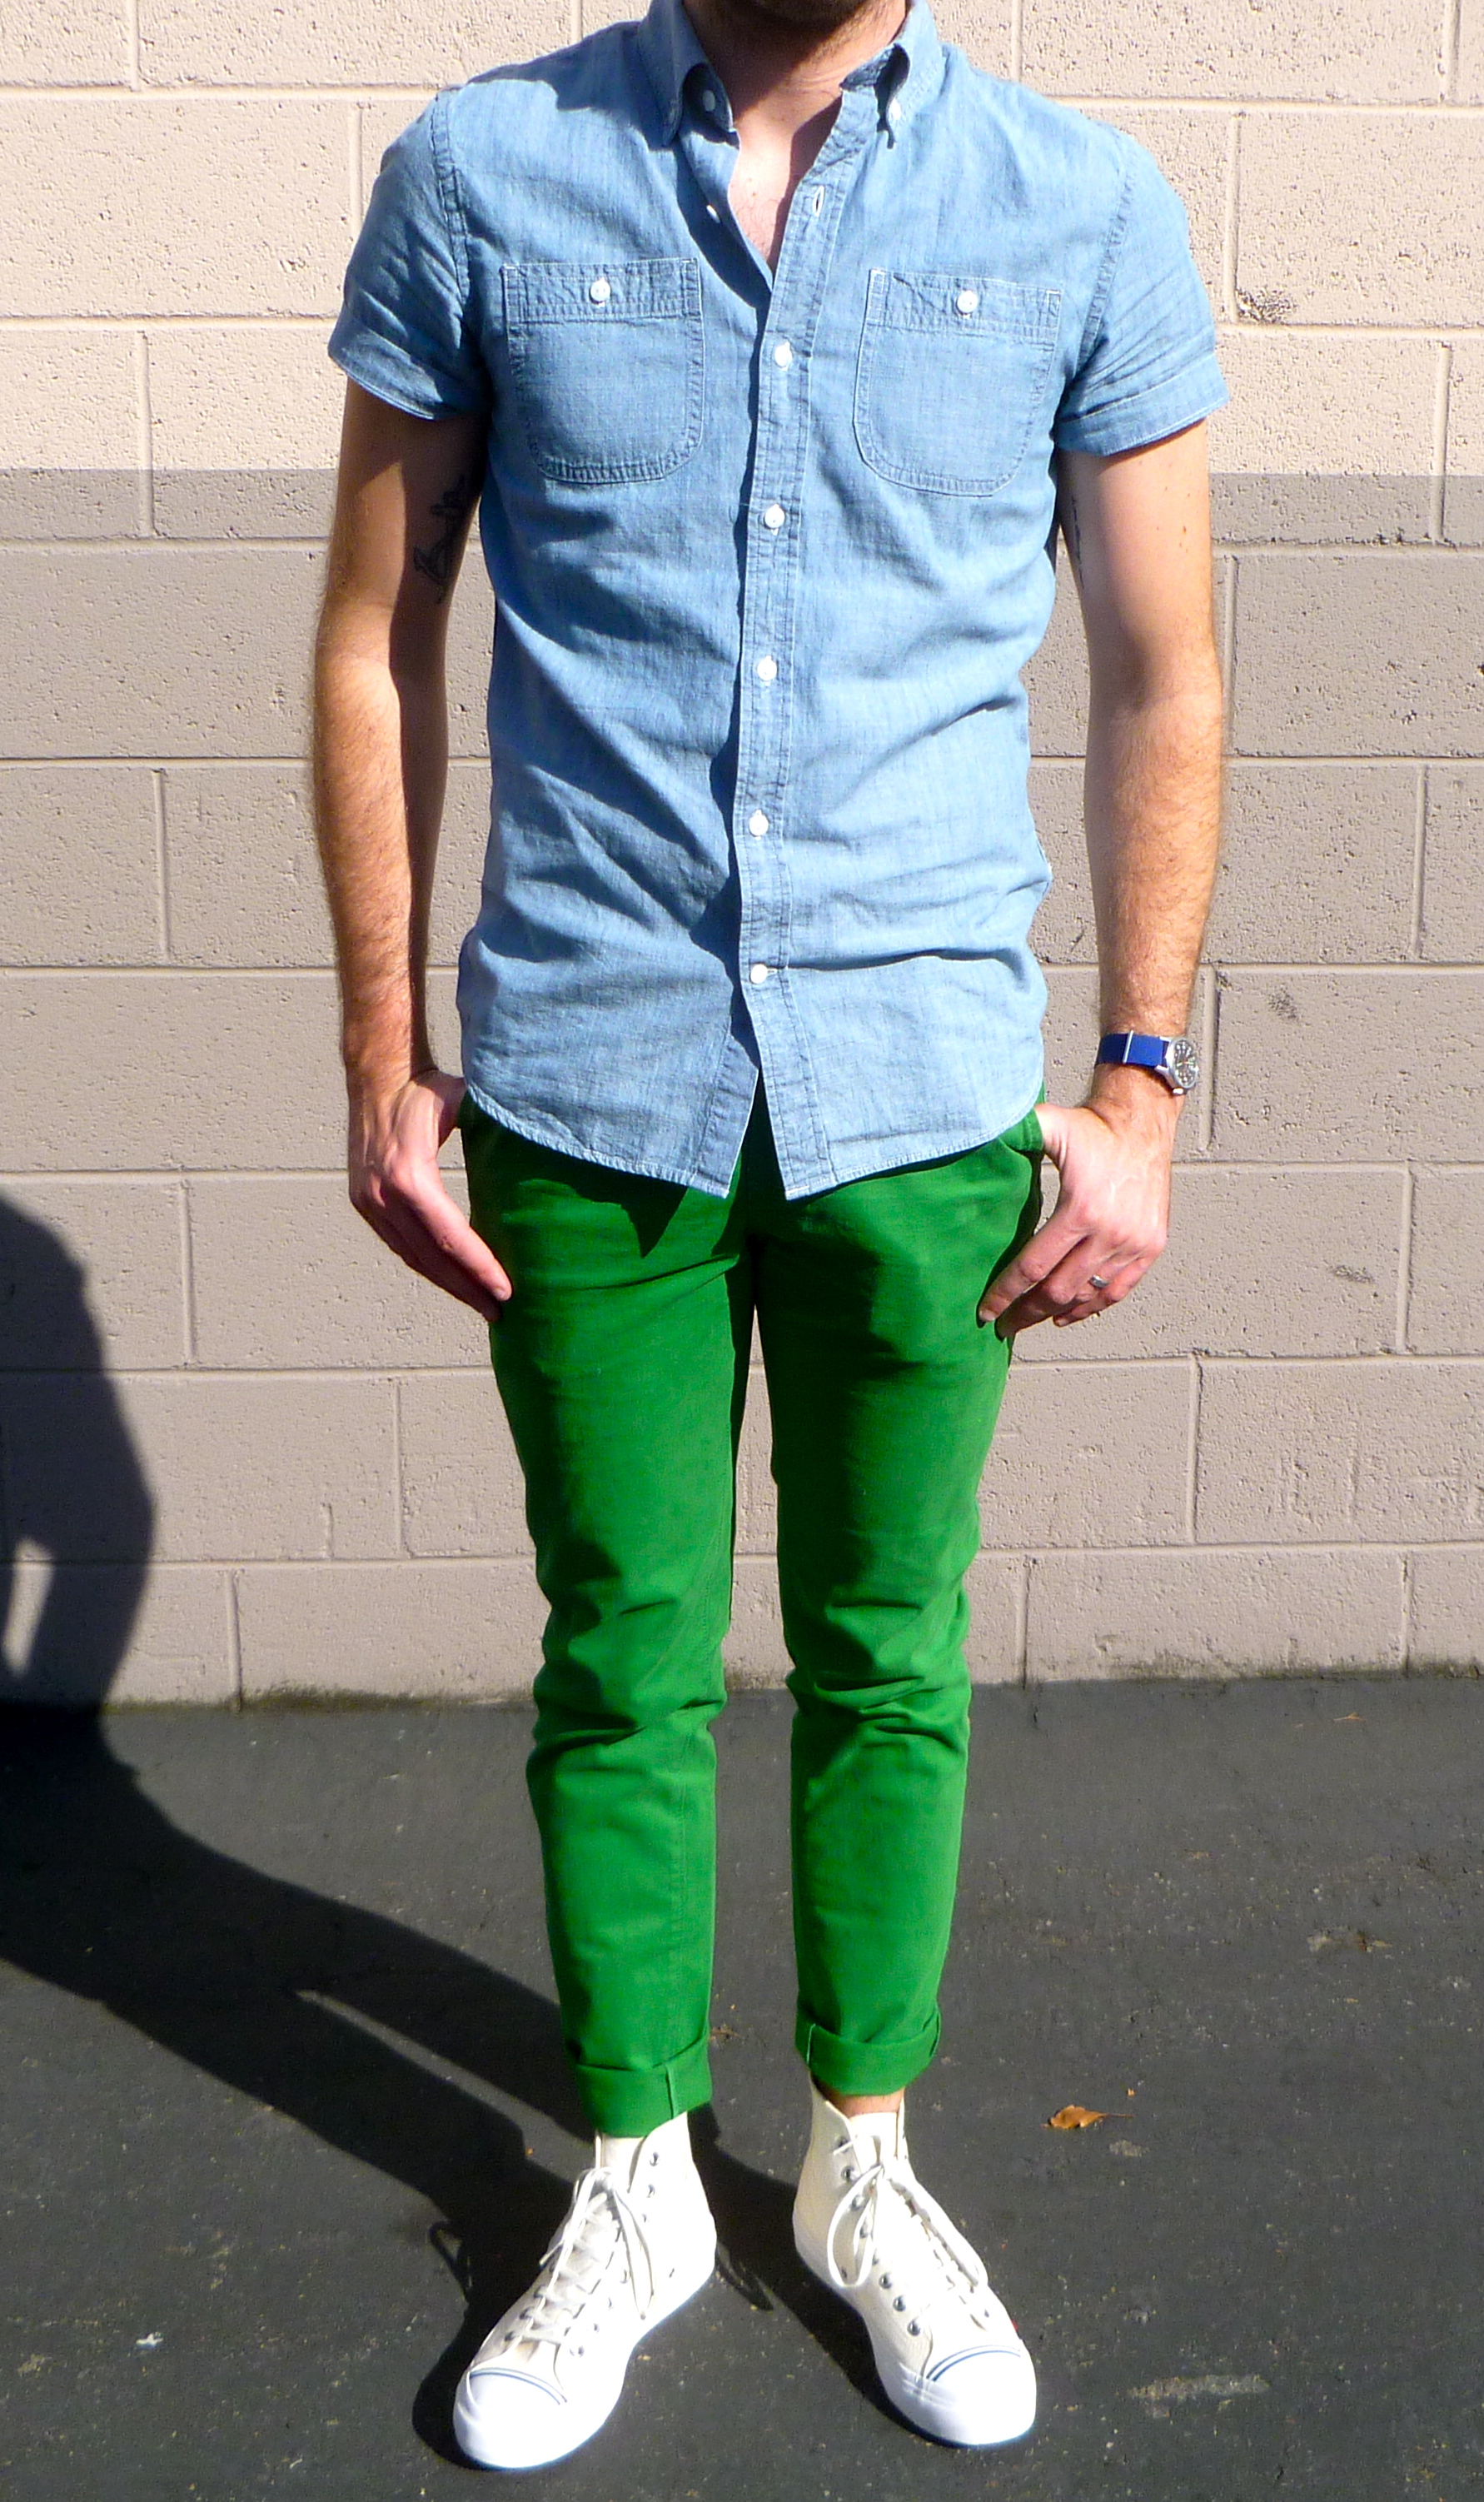 HOW TO: Wear Bright Colored Pants (For The Man Who Is Afraid Of ...